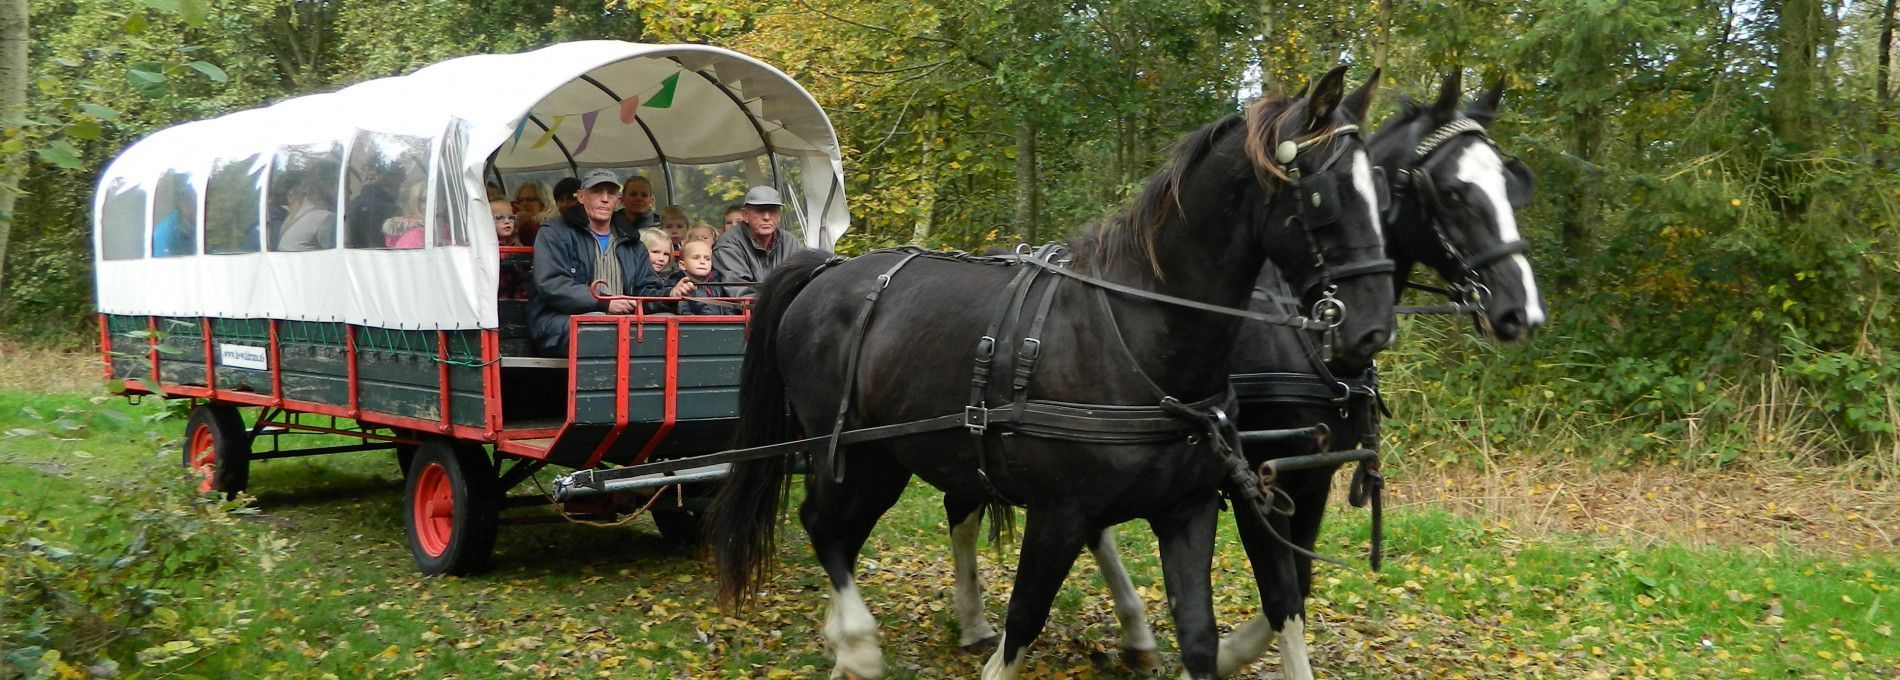 Covered wagon and horse and carriage roundtrips - Tourist information Centre 